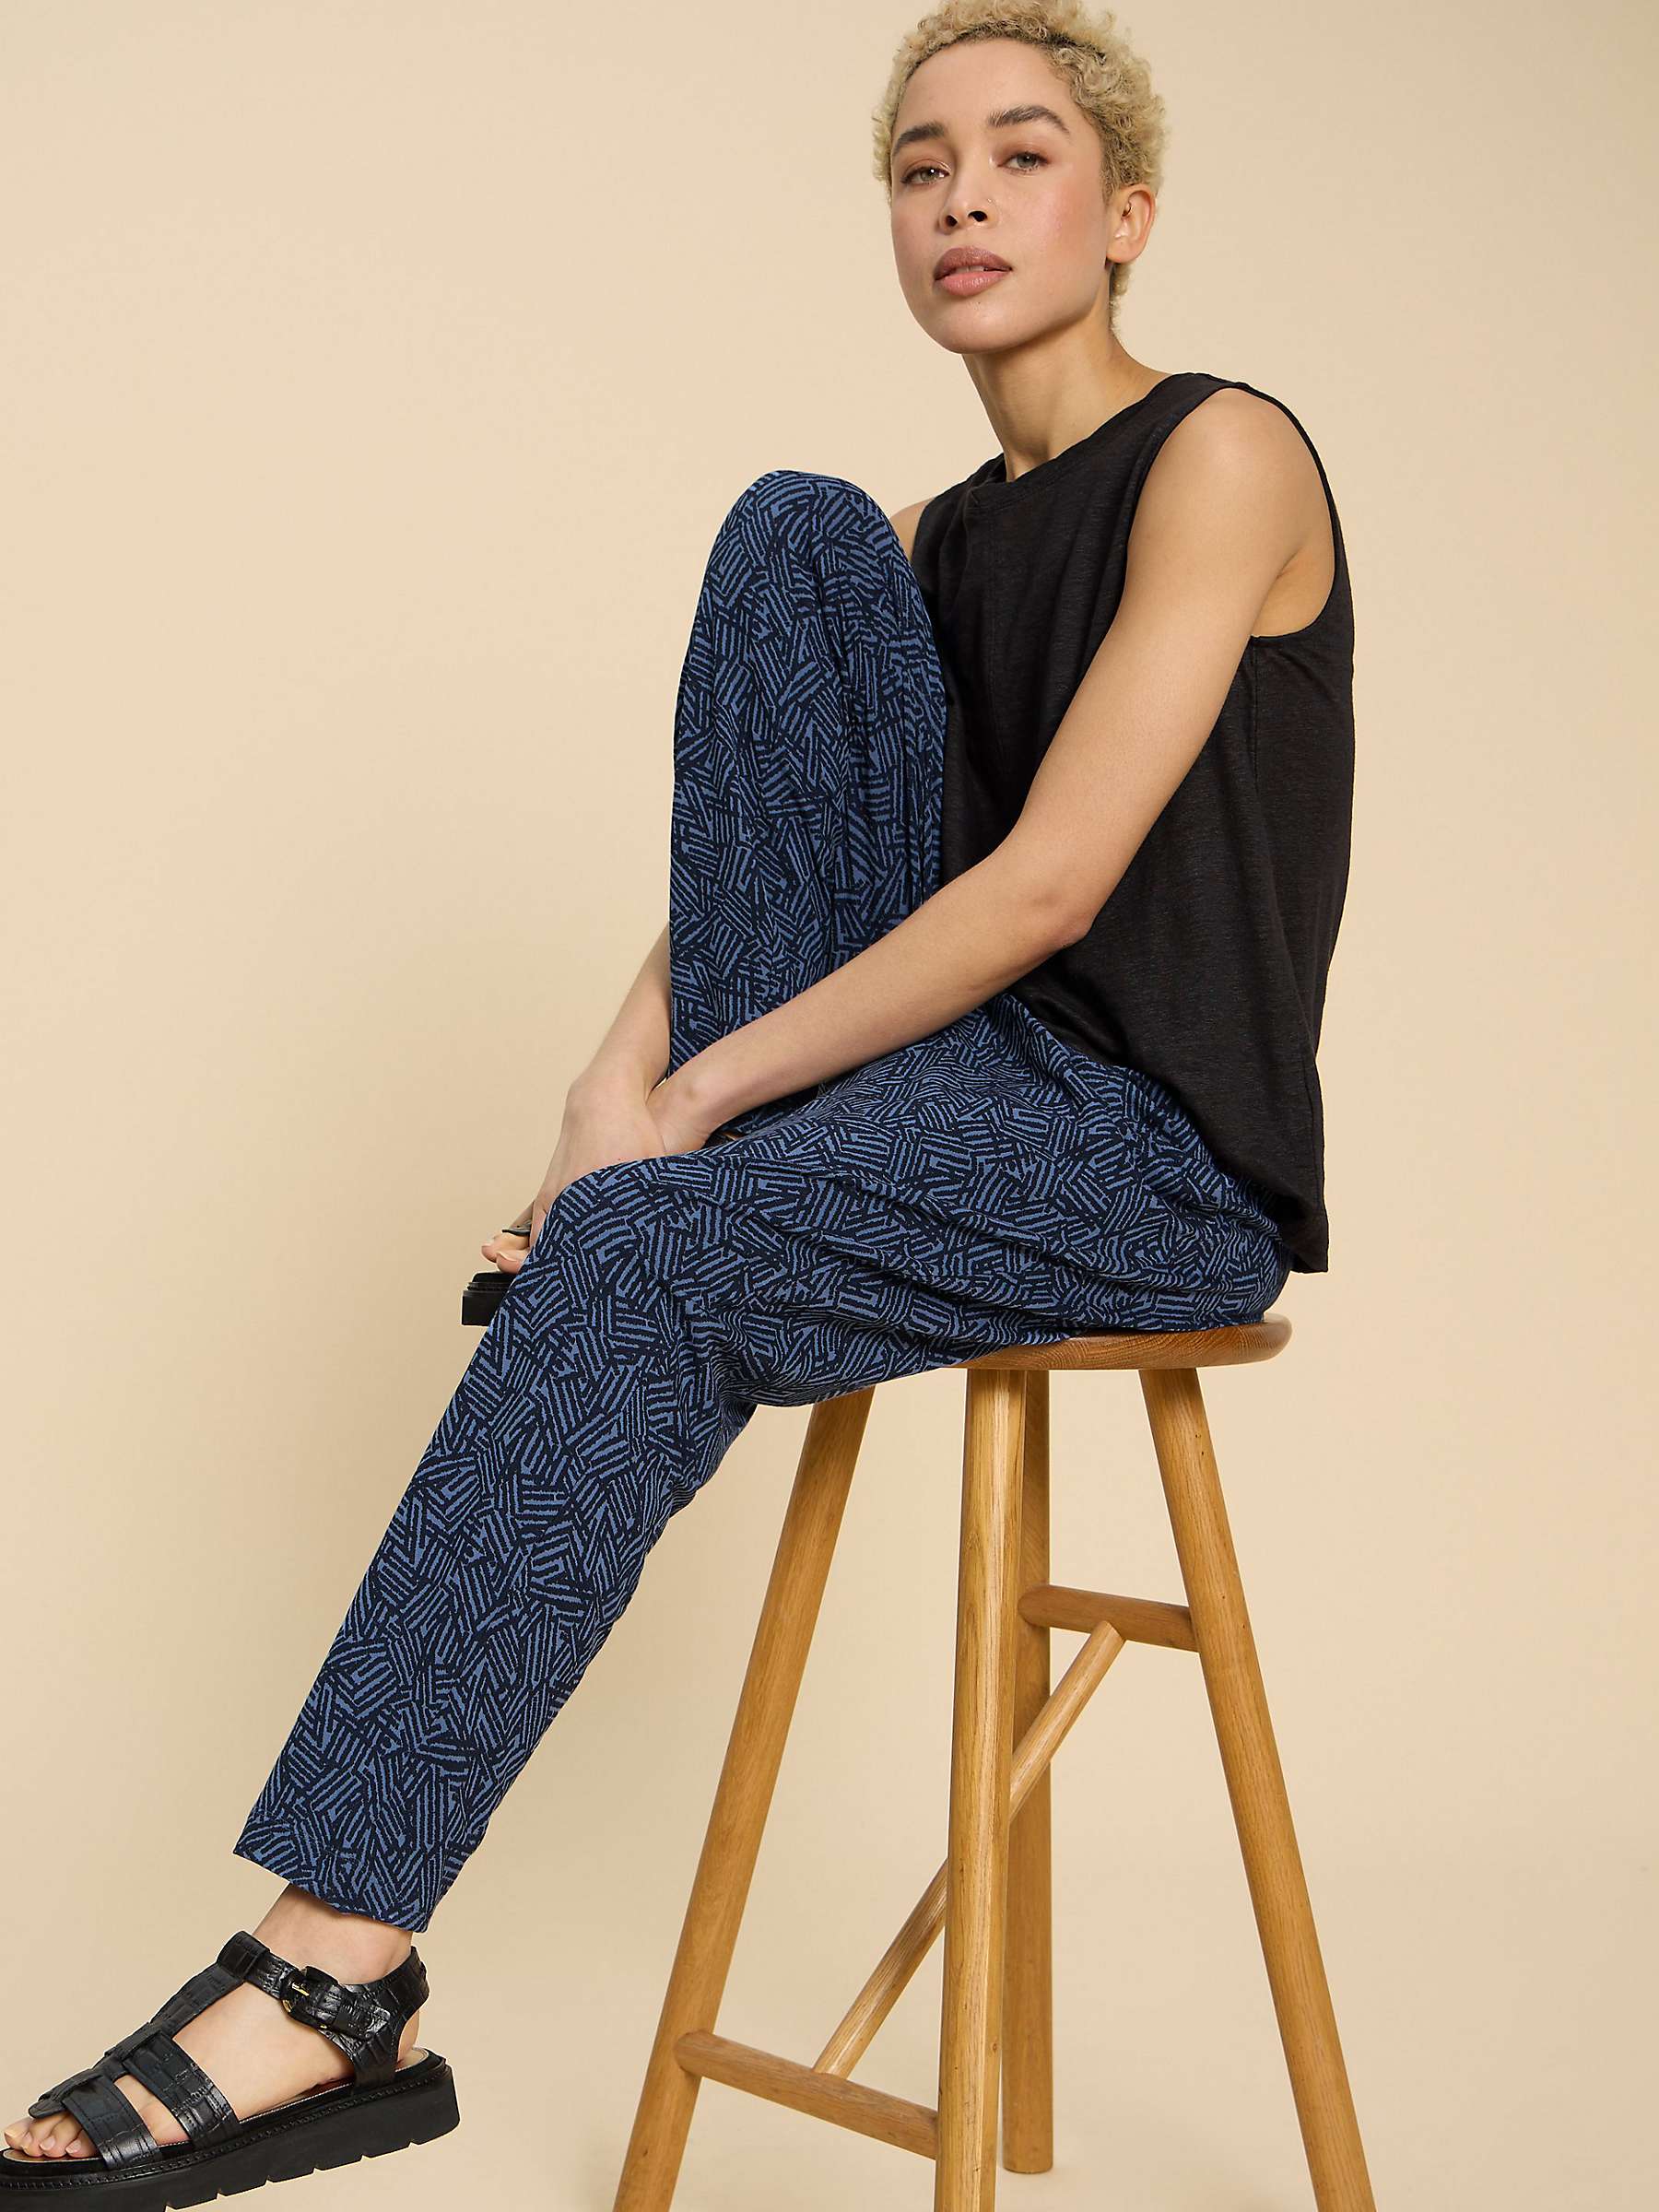 Buy White Stuff Maison Abstract Print Trousers, Navy Online at johnlewis.com